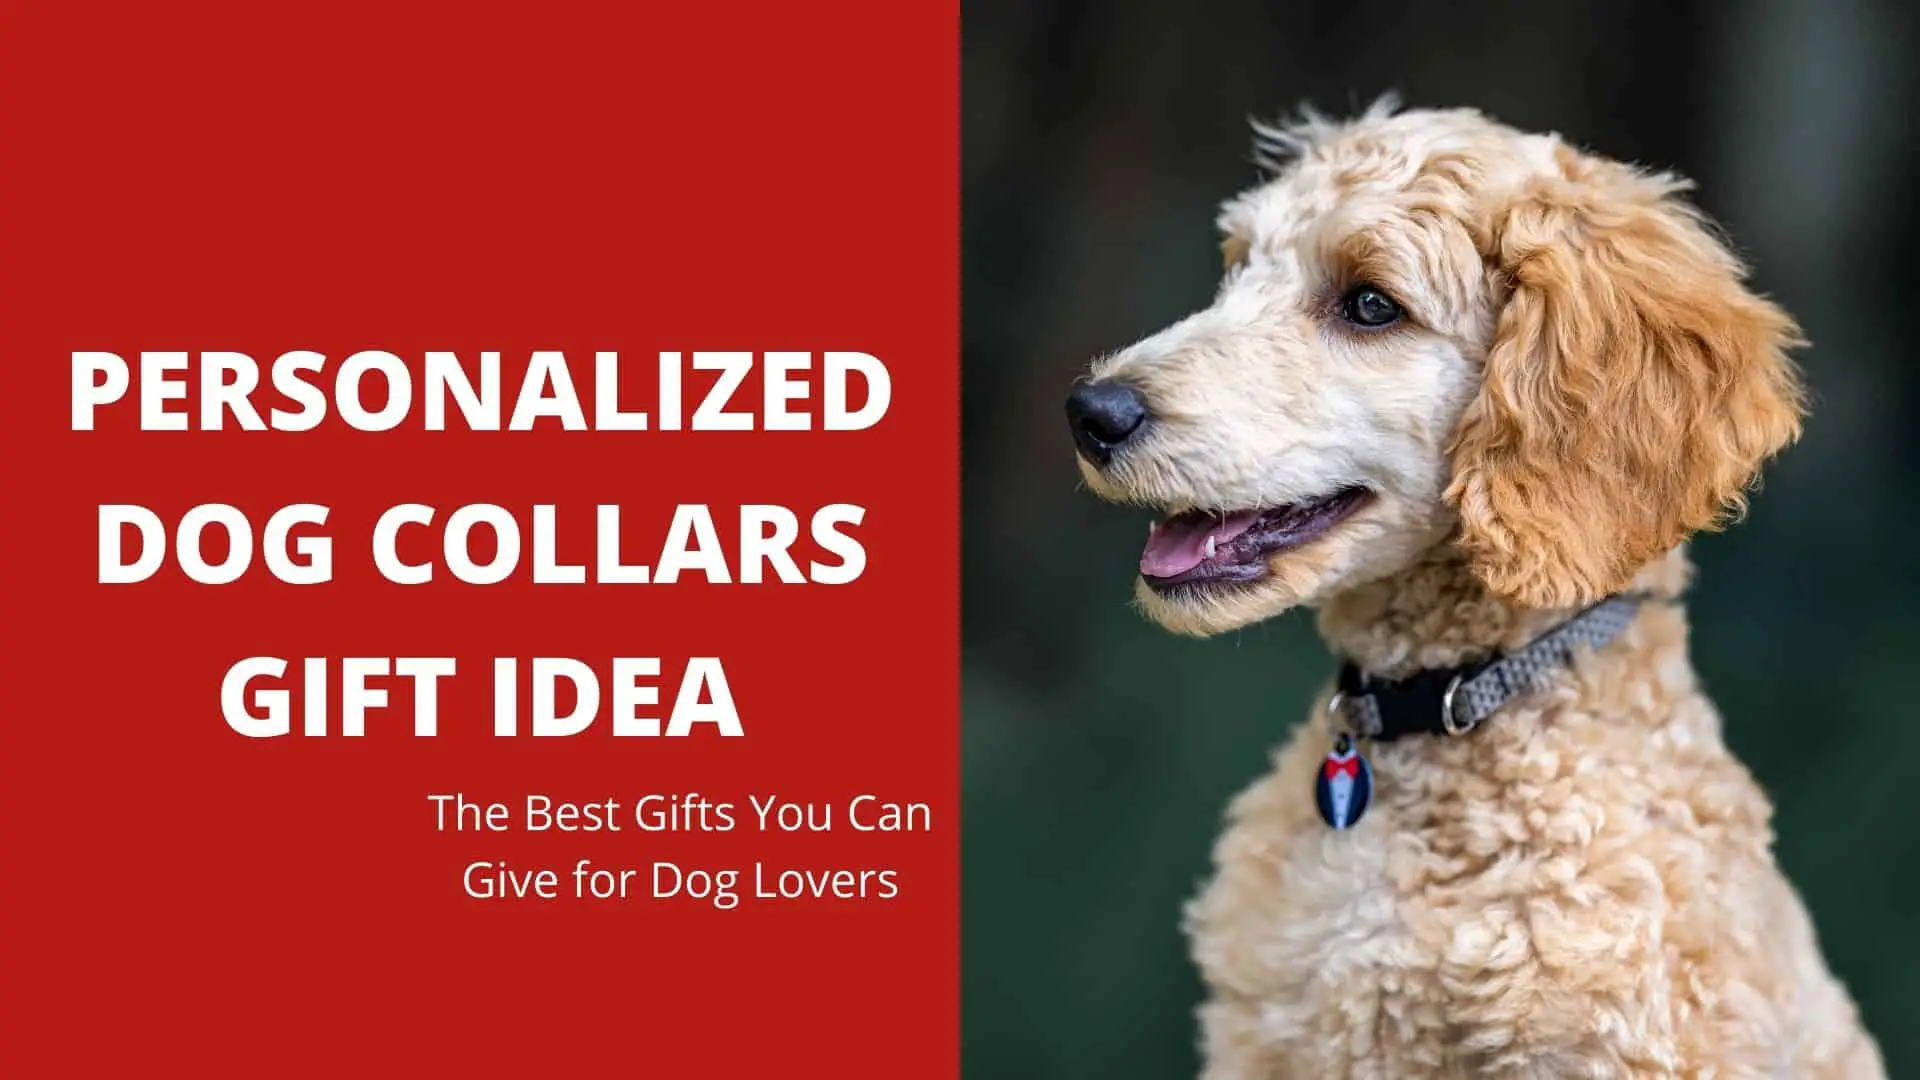 Personalized Dog Collars Gift Idea: The Best Gifts You Can Give for Dog Lovers – 2022